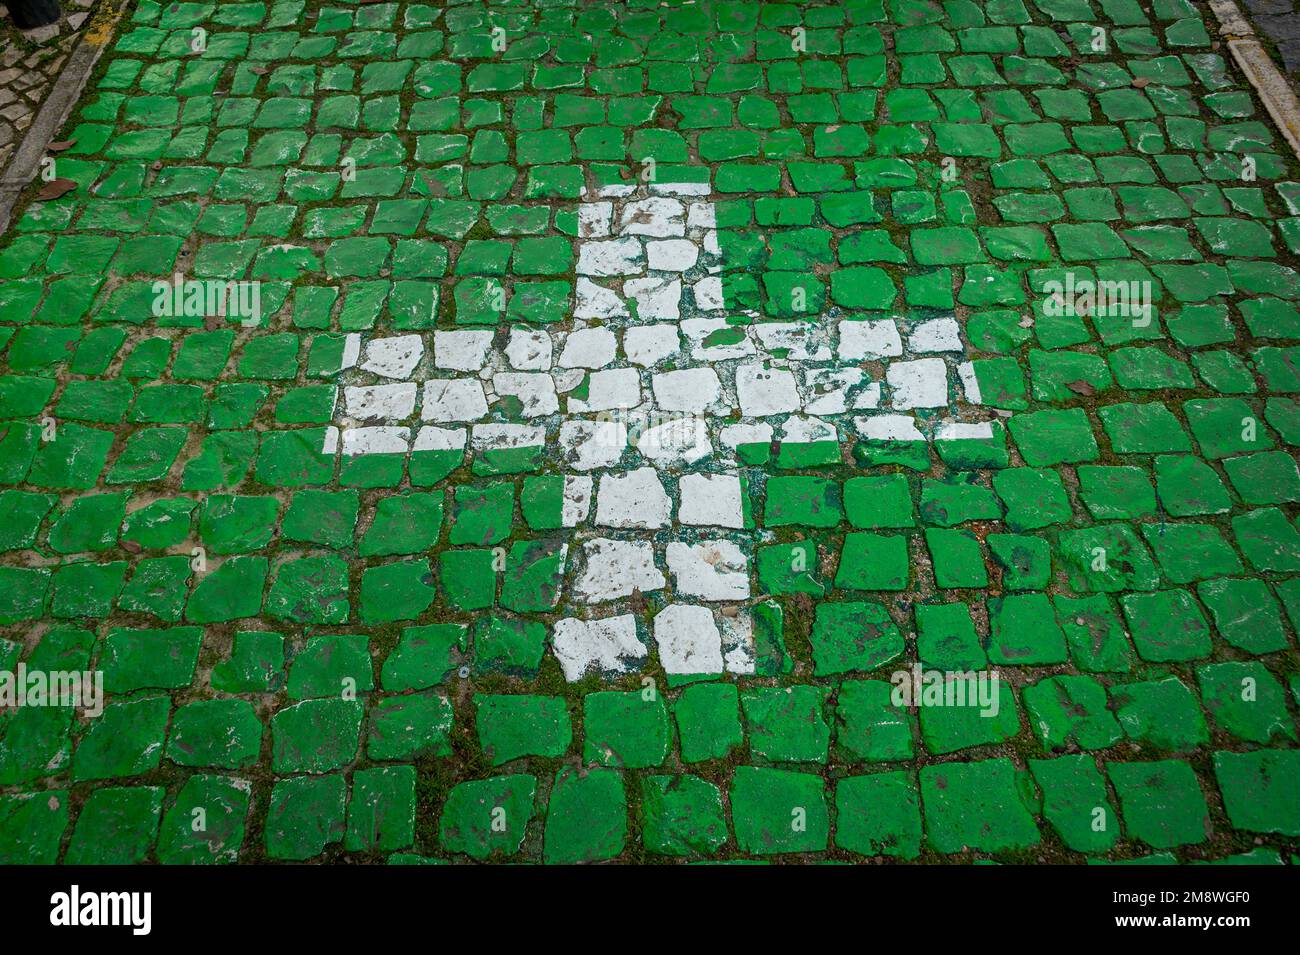 White cross on a green tiles background, pharmacy parking in Portugal. Stock Photo